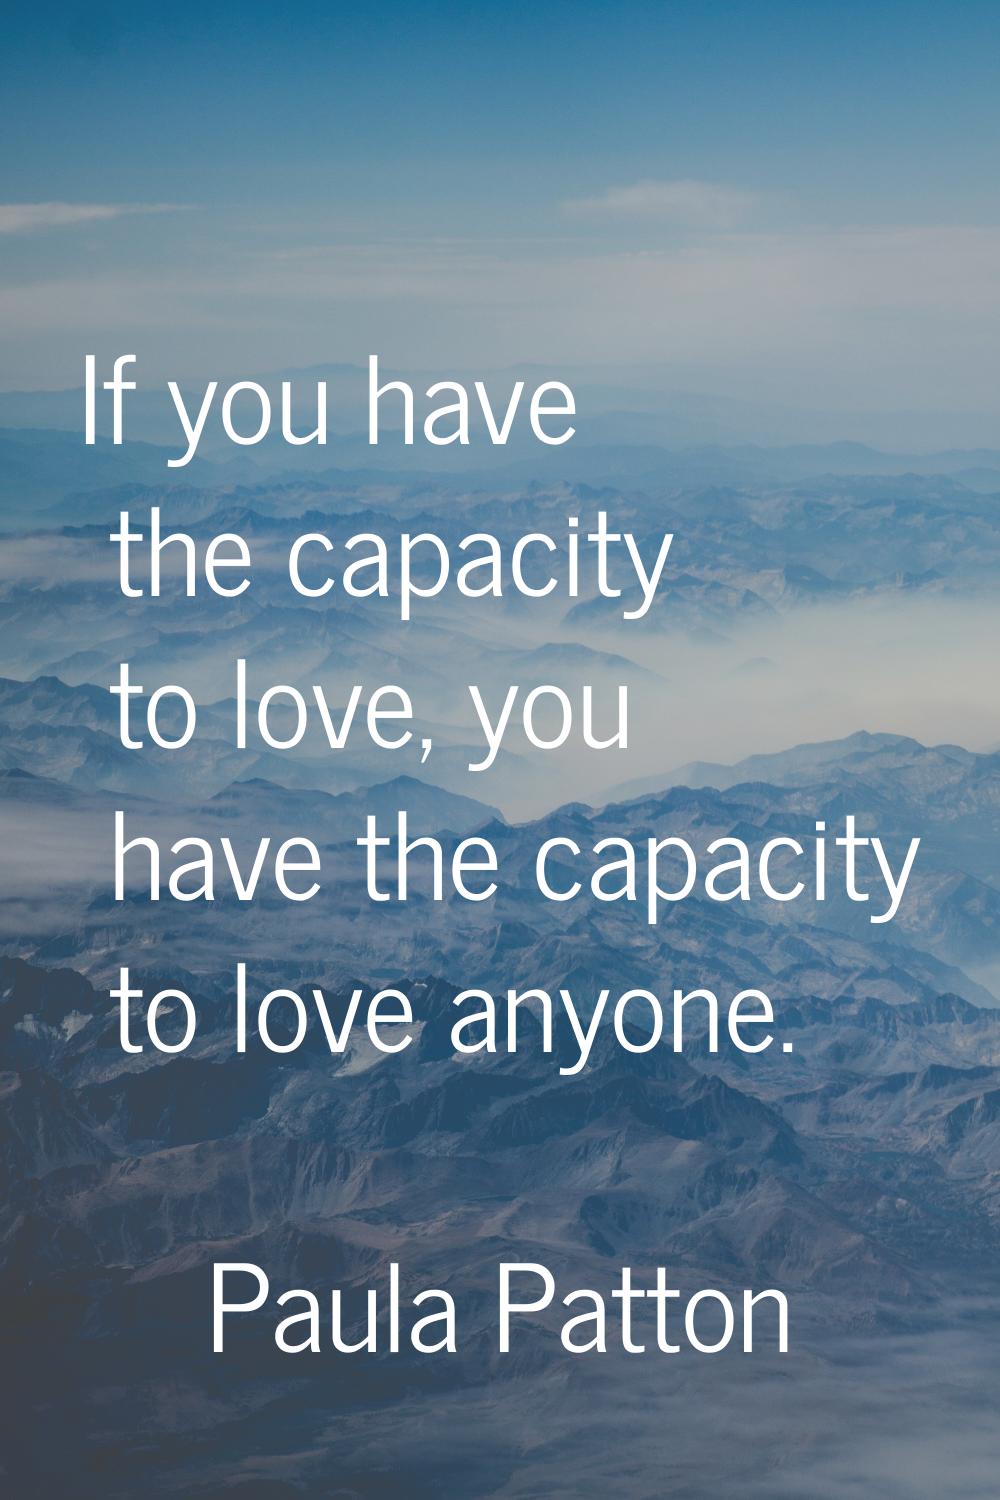 If you have the capacity to love, you have the capacity to love anyone.